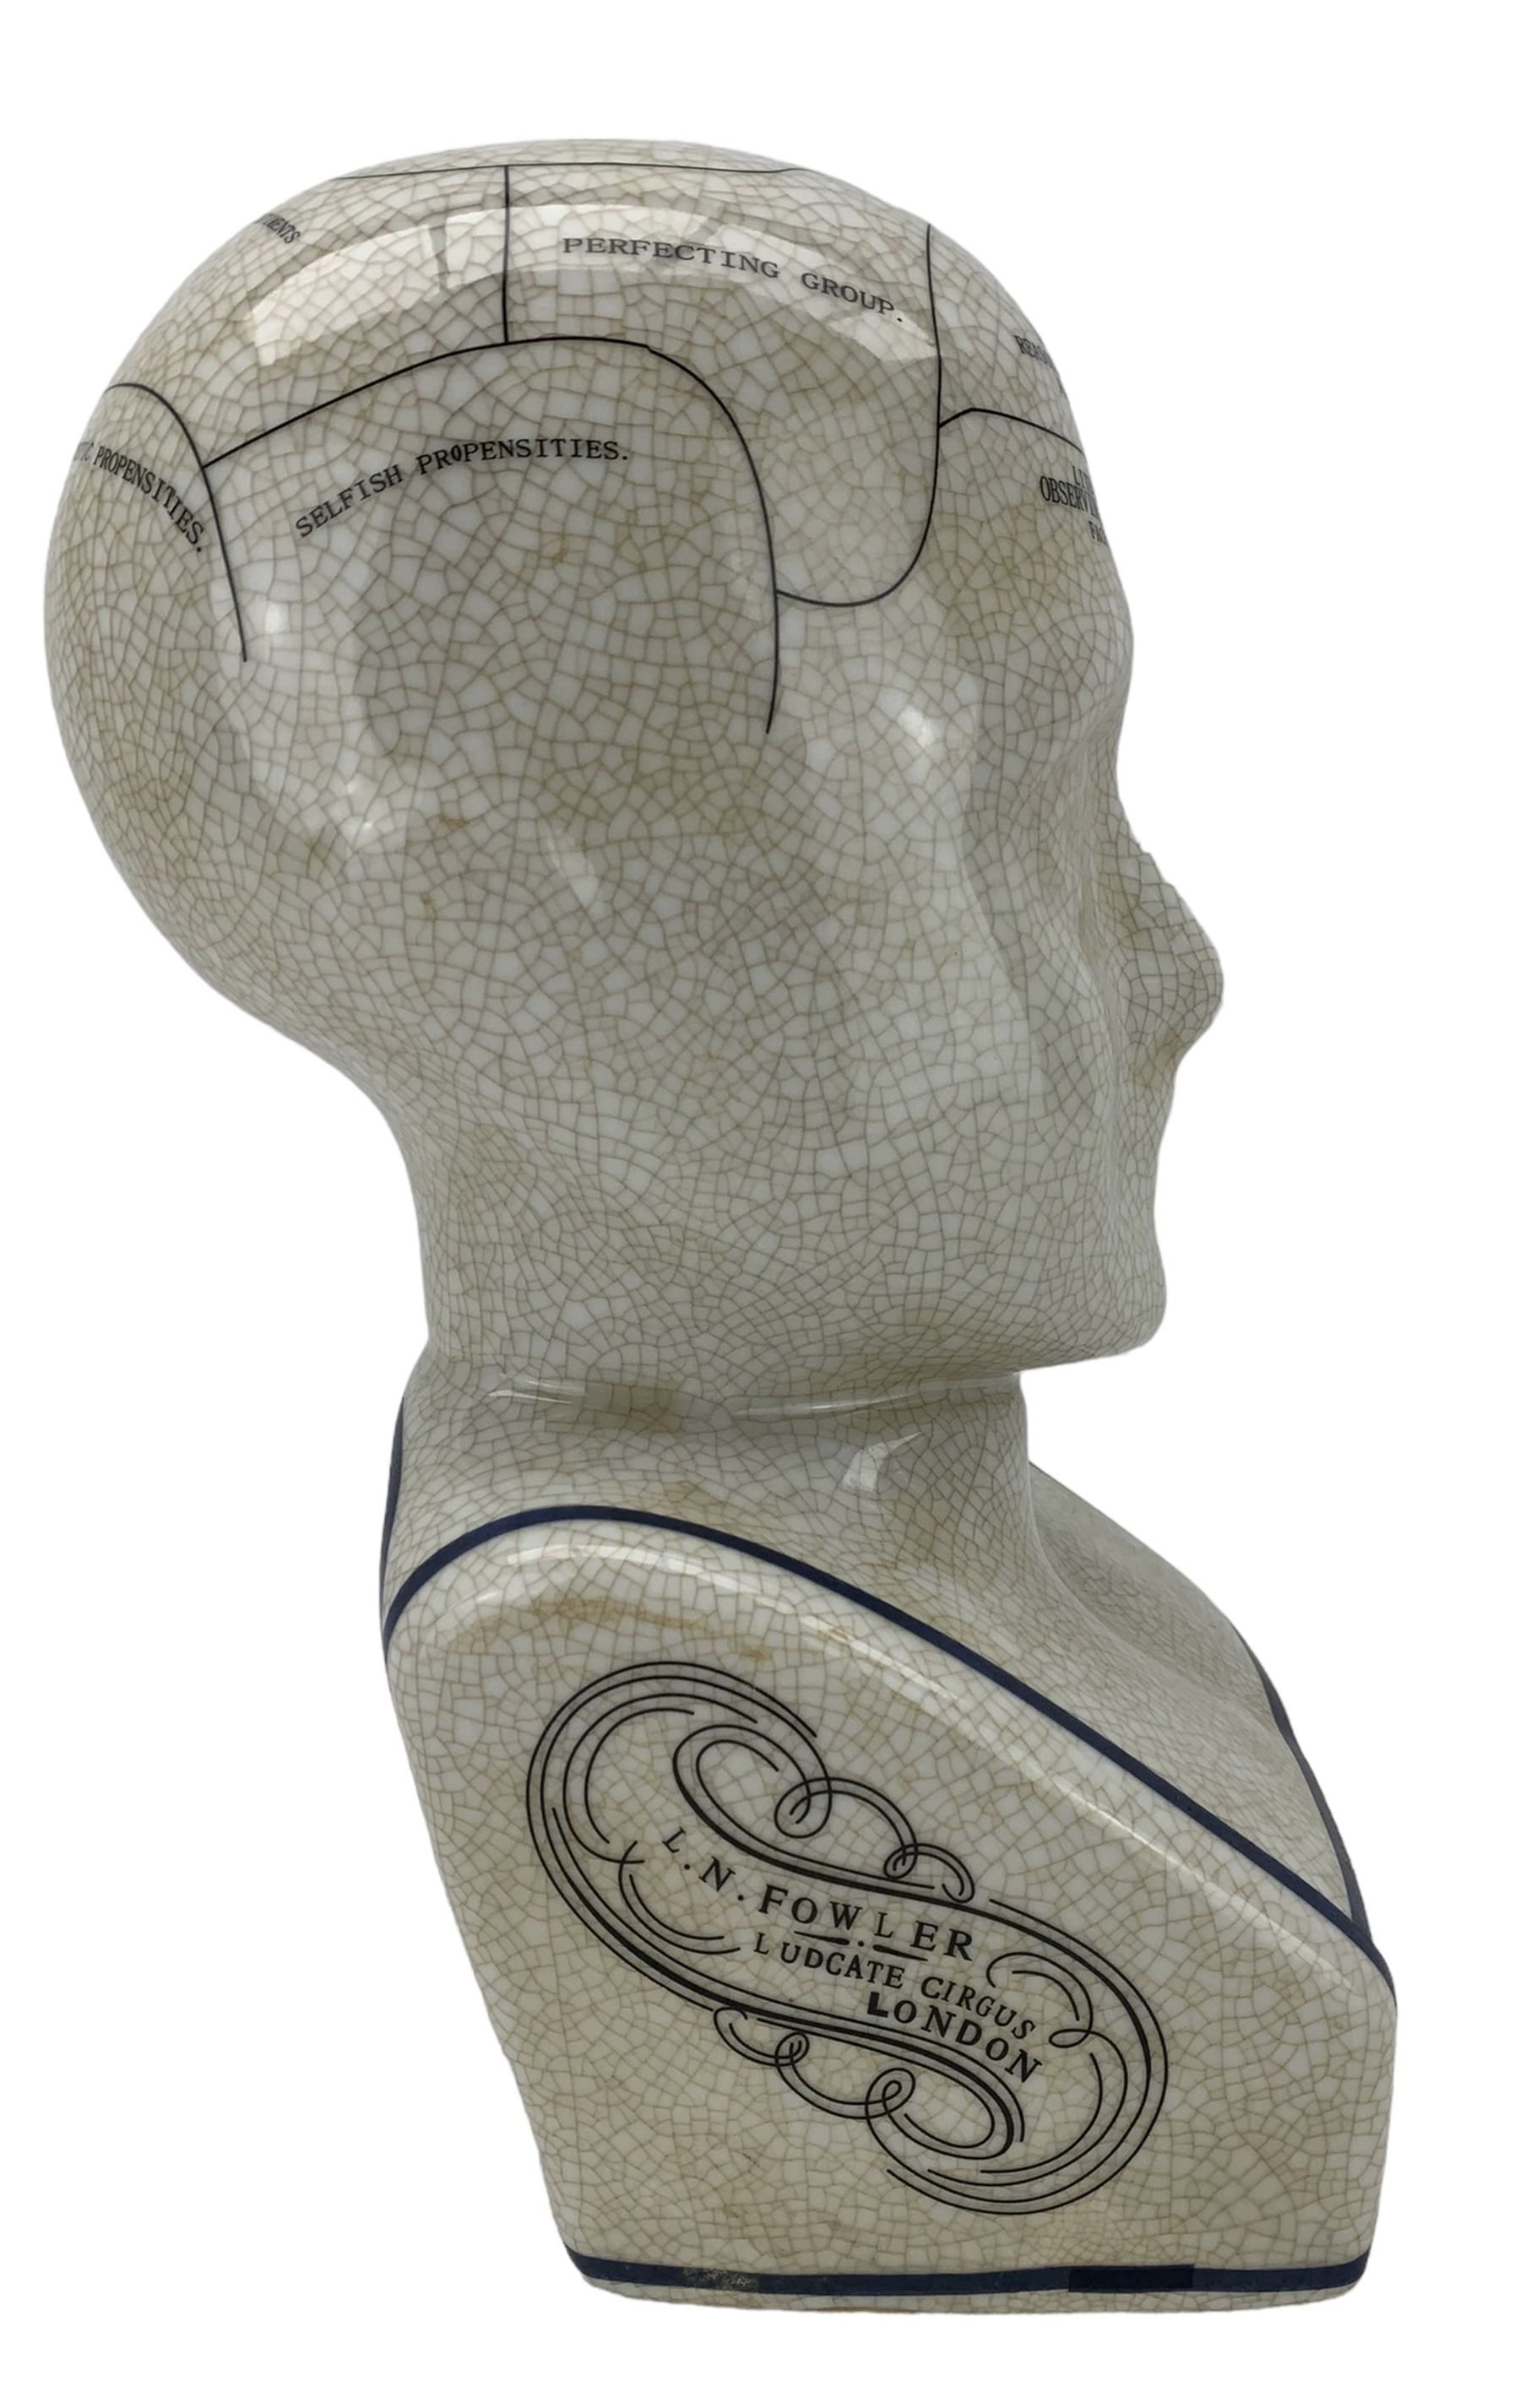 Ceramic Phrenology bust after L.N. Fowler - Image 4 of 4